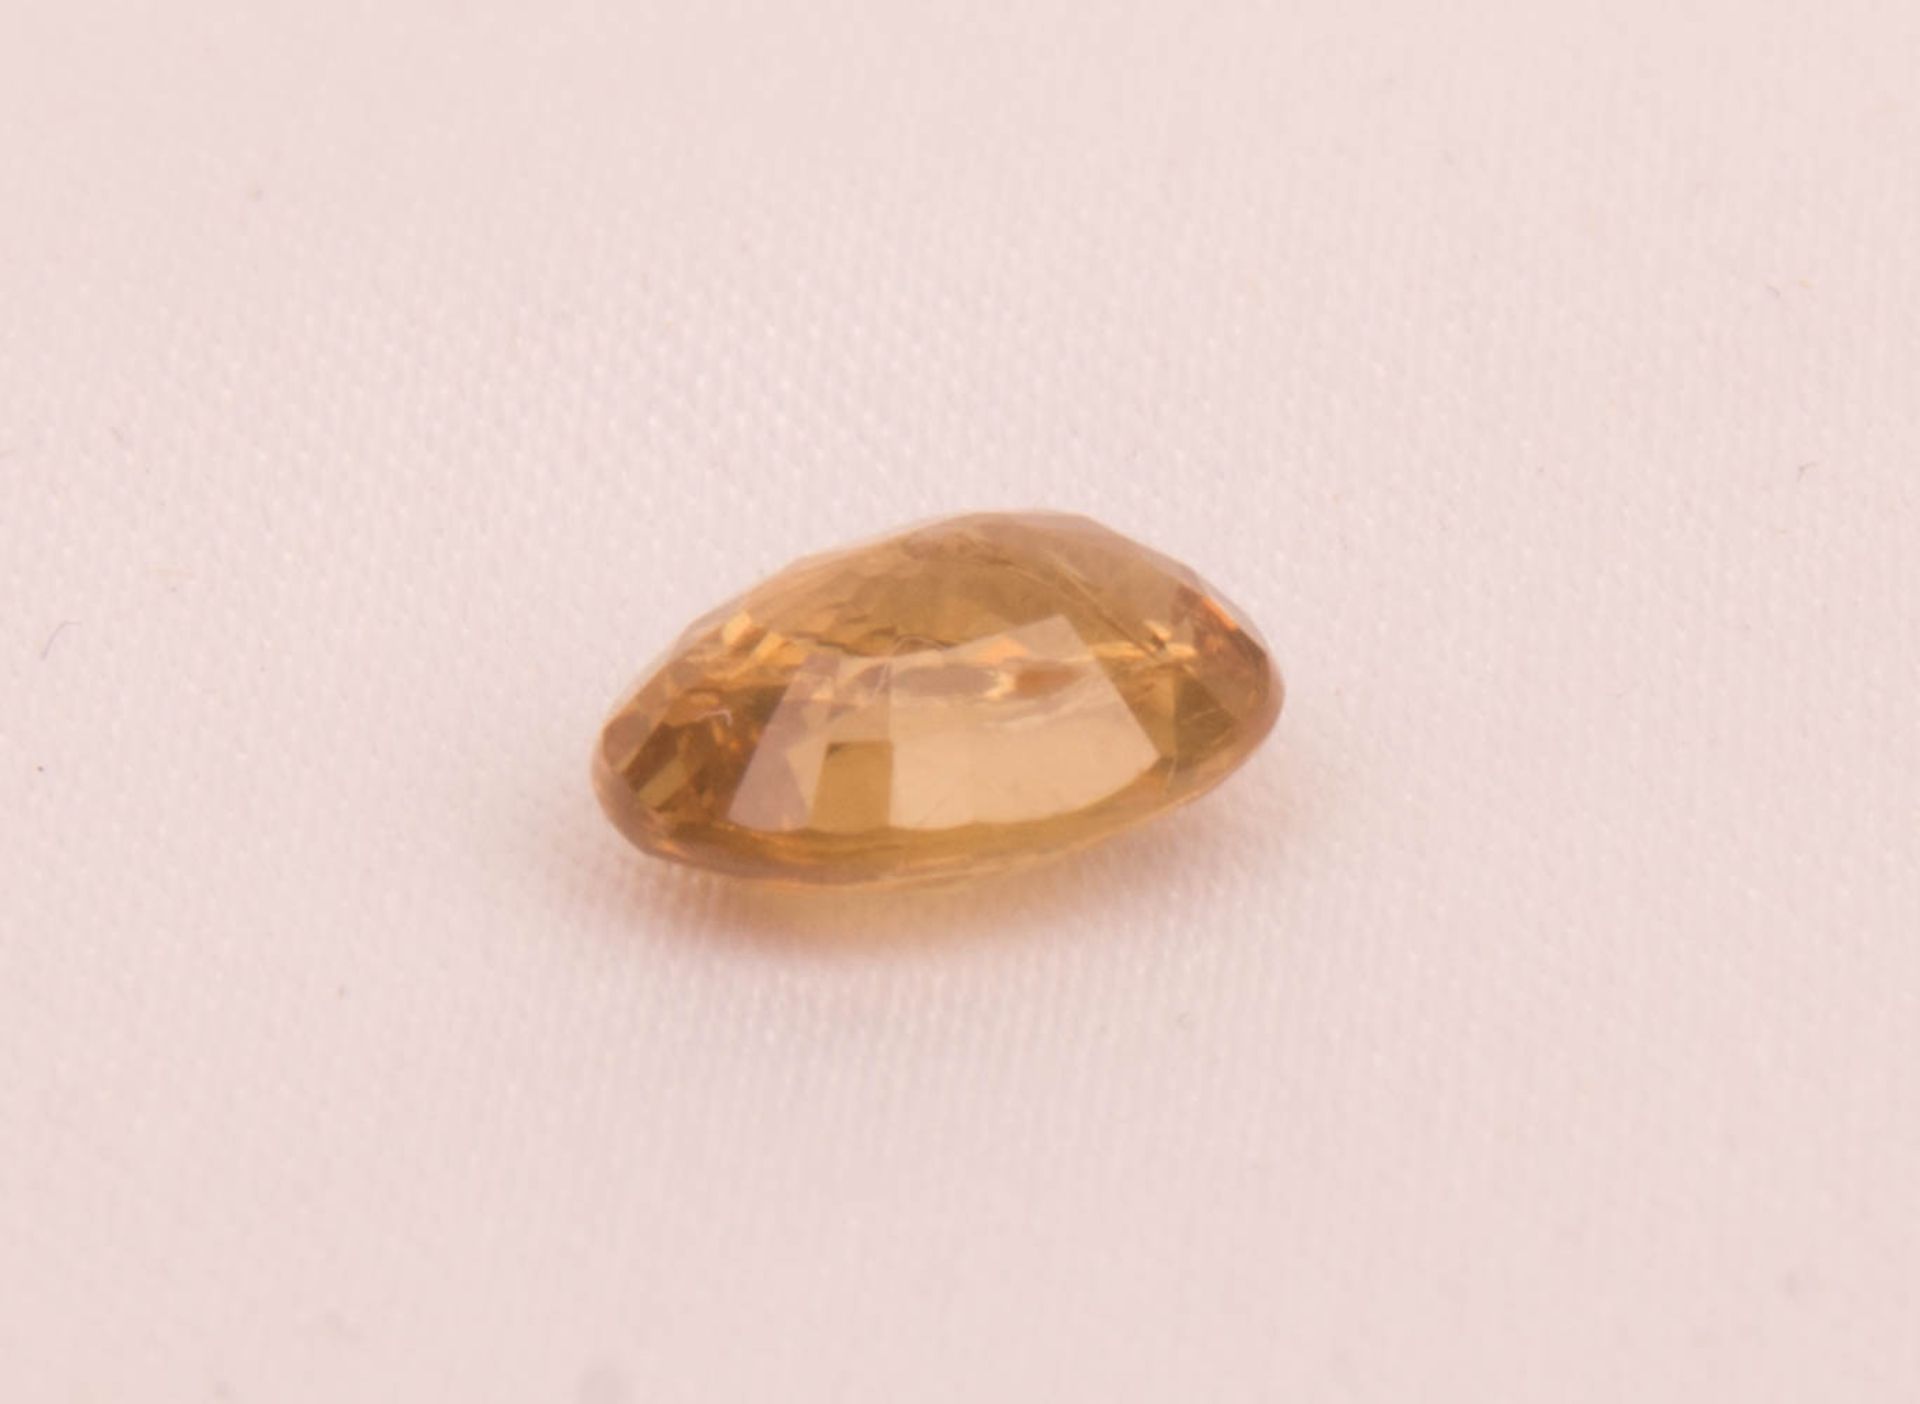 Natural sapphire, 1.15 ct. - Image 12 of 12